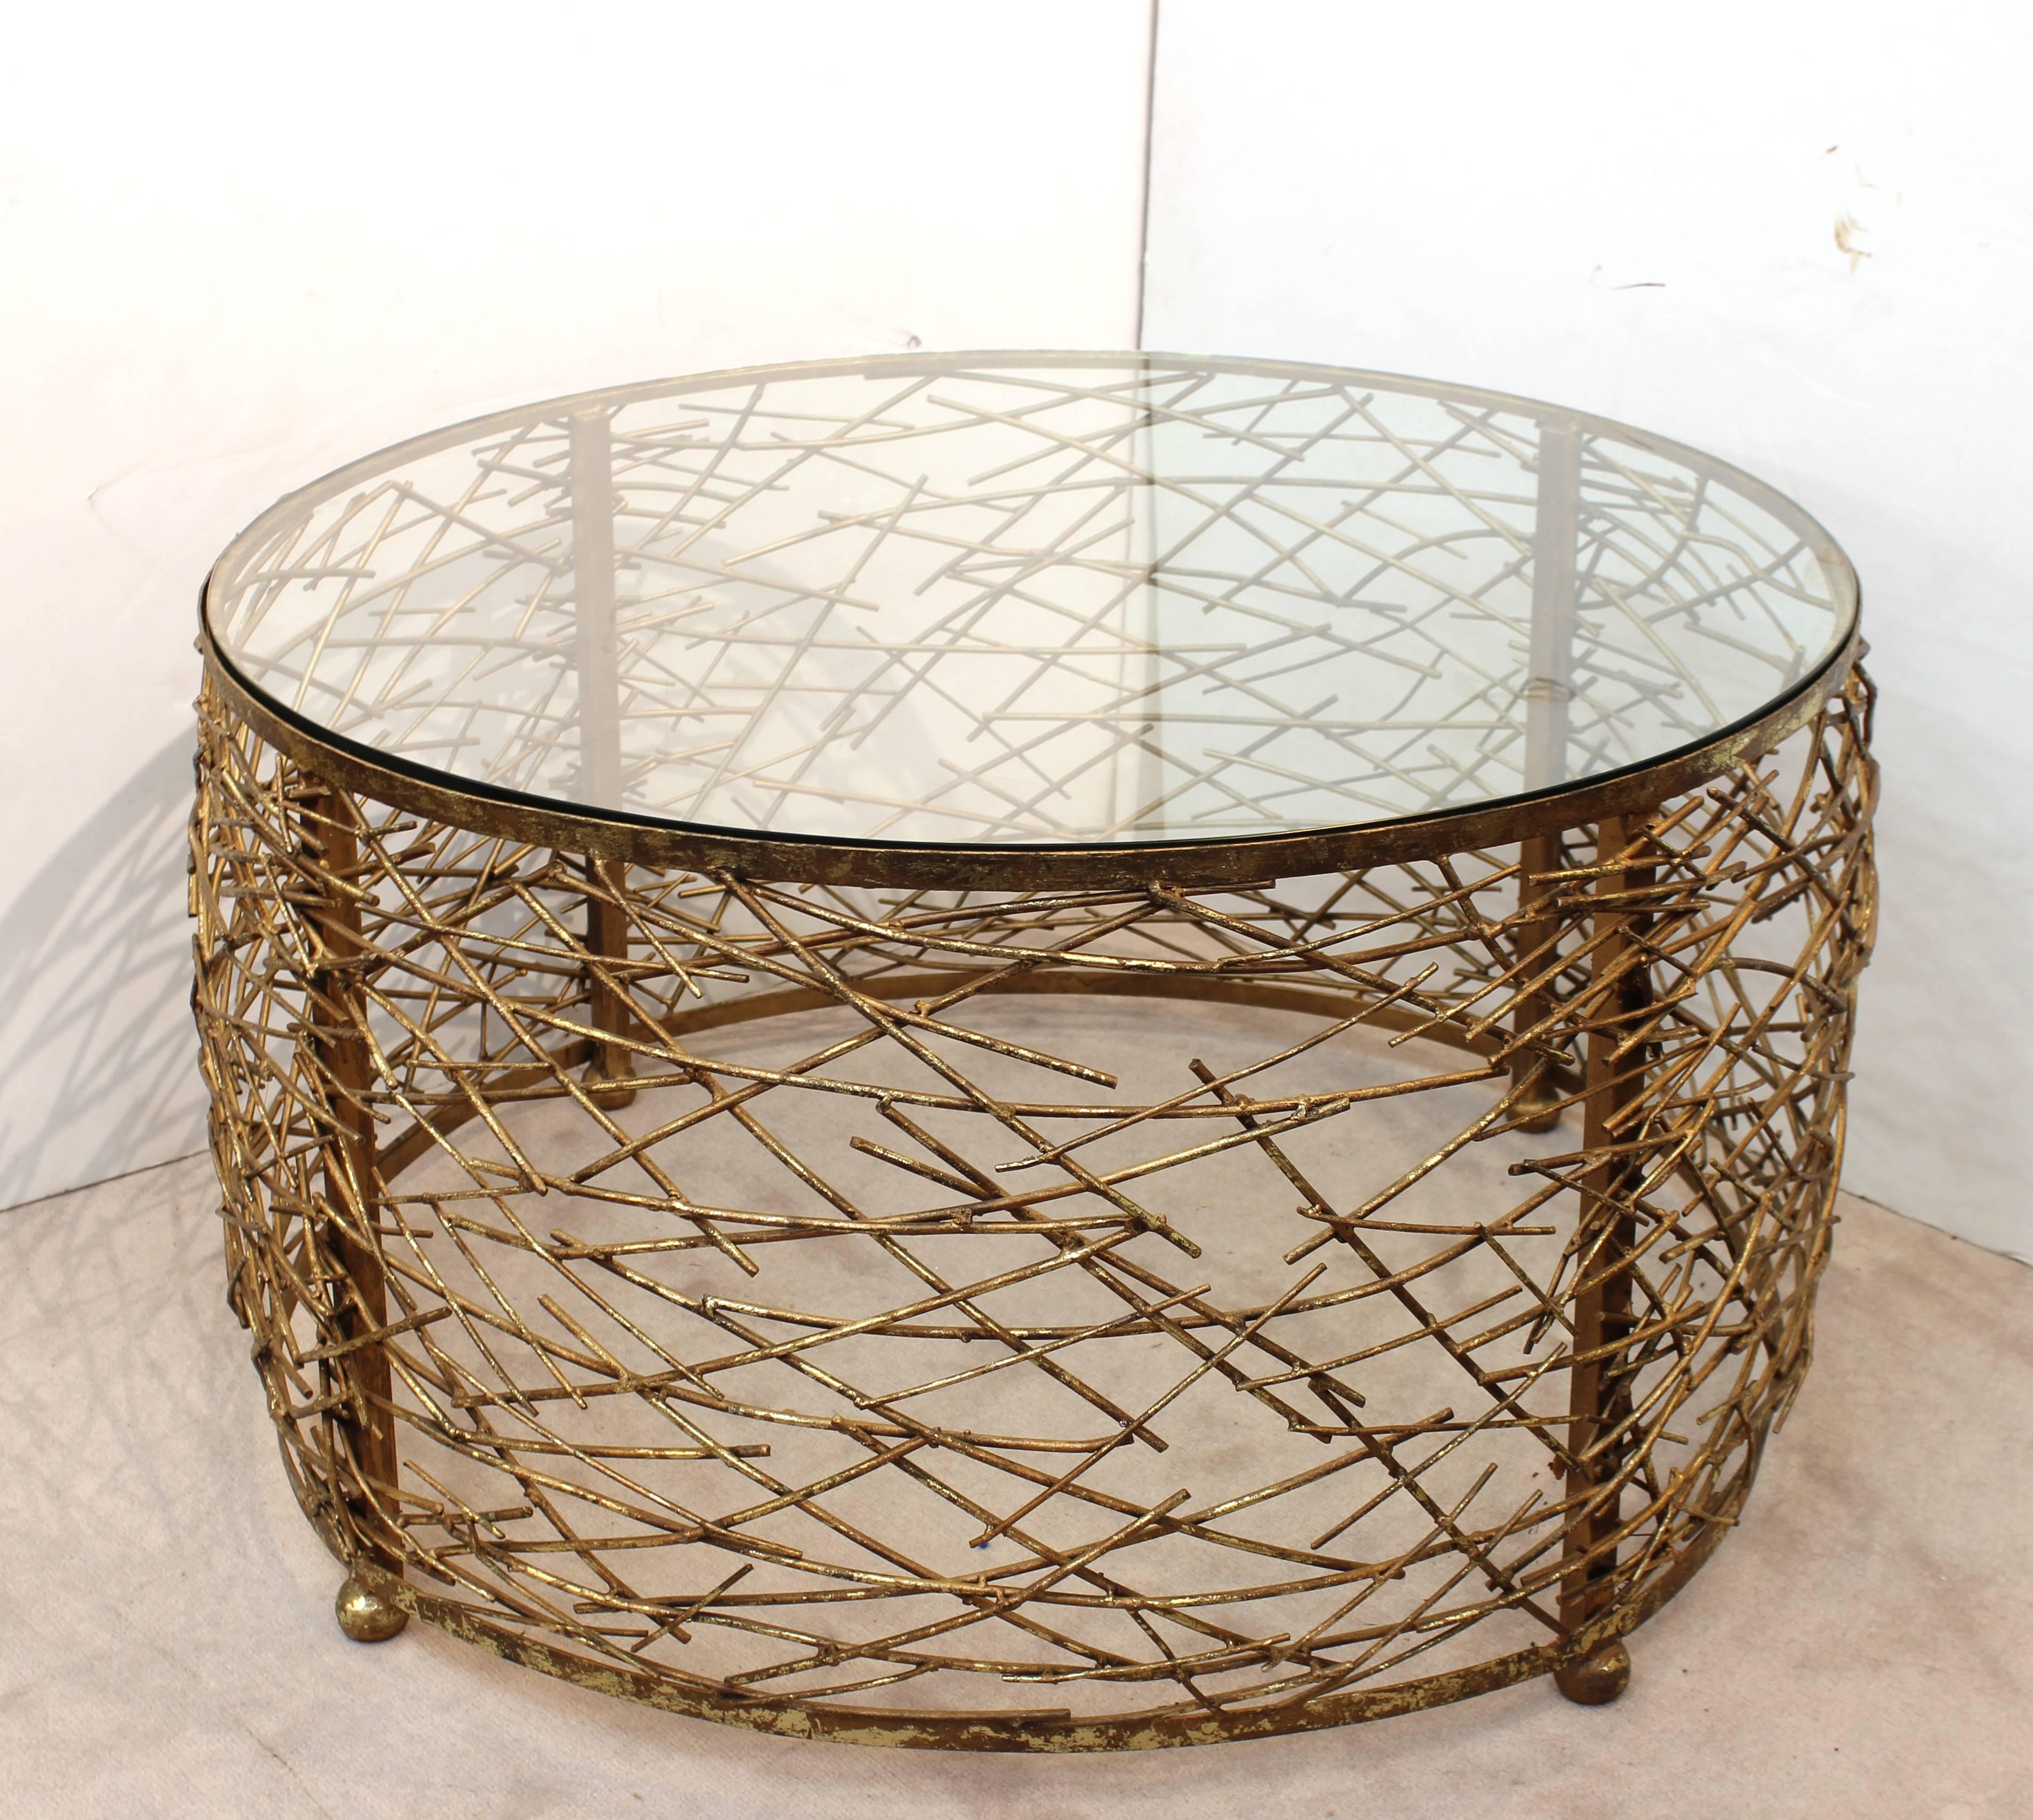 Mid-Century Modern cocktail table with round glass top and metal base. The base is nest shaped with numerous overlapping metal 'twigs.' Crafted in metal with gold colored finish. The table stands on several spherical feet. Wear to metal and finish